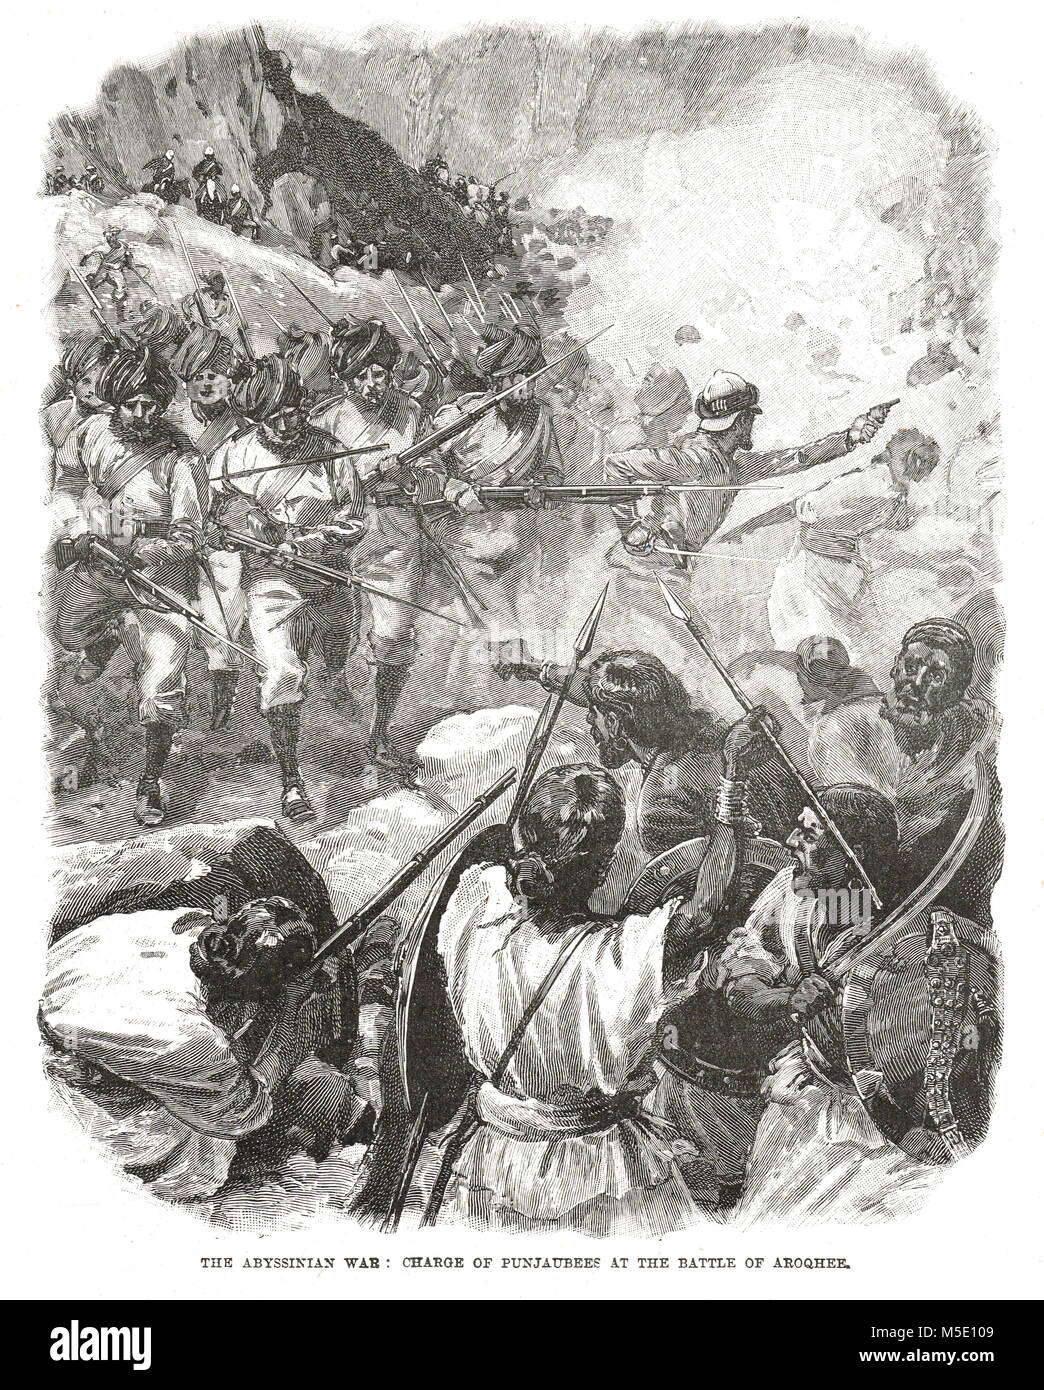 Punjabis charge at Arogye, The Battle of Magdala, April 1868, British Expedition to Abyssinia Stock Photo